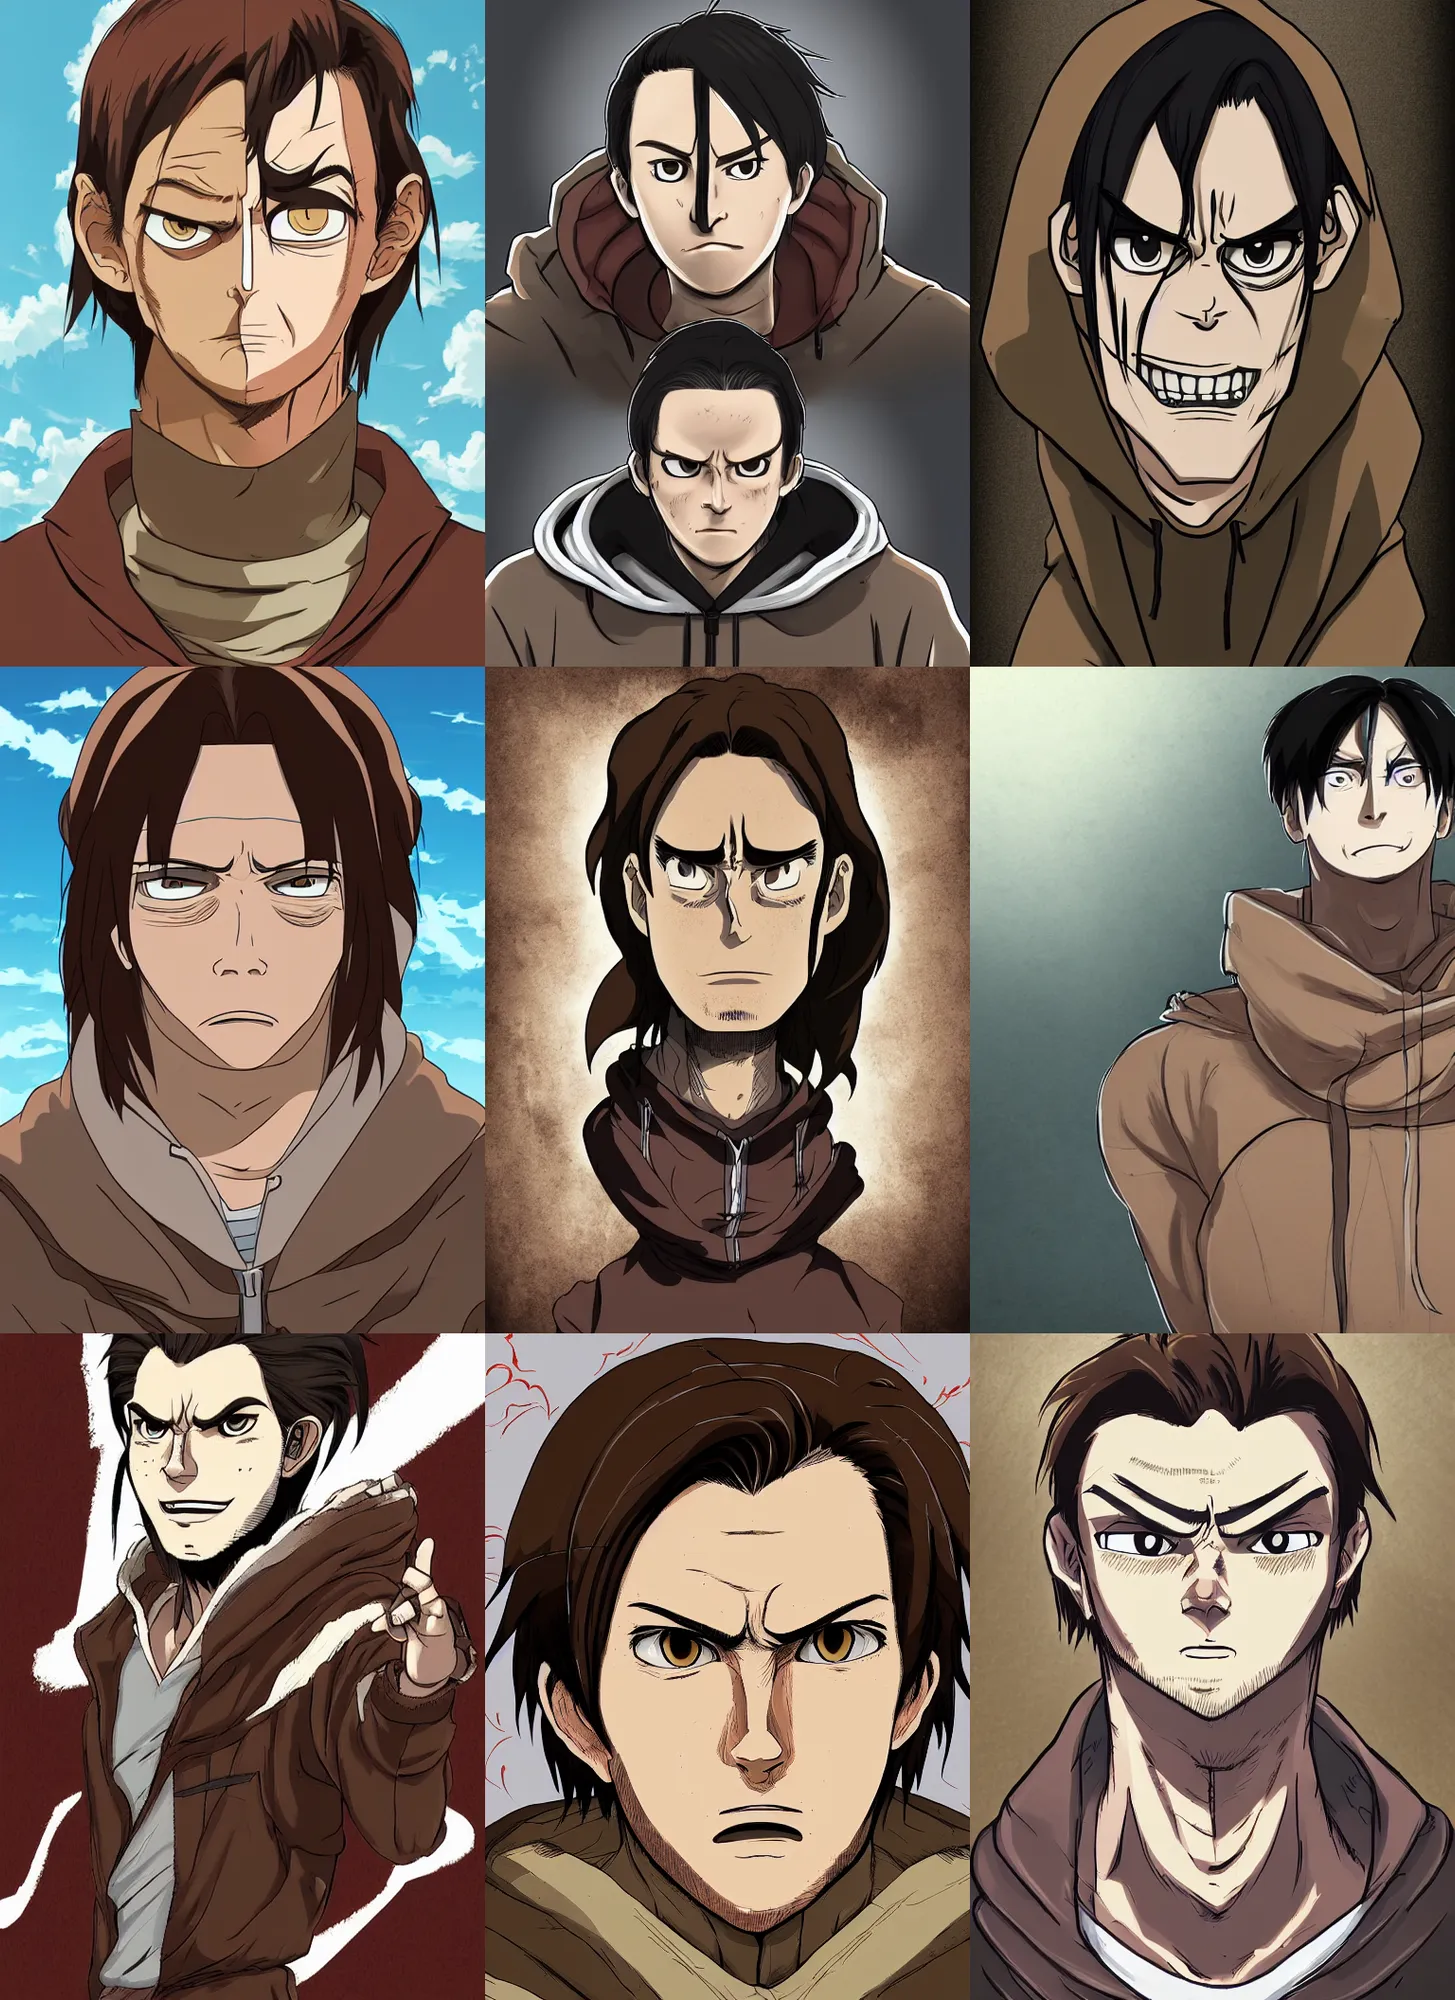 Prompt: portrait of a man in his late twenties with longish brown hair tied back, widows peak and a round face wearing a hoody in the style of attack on titan, digital art